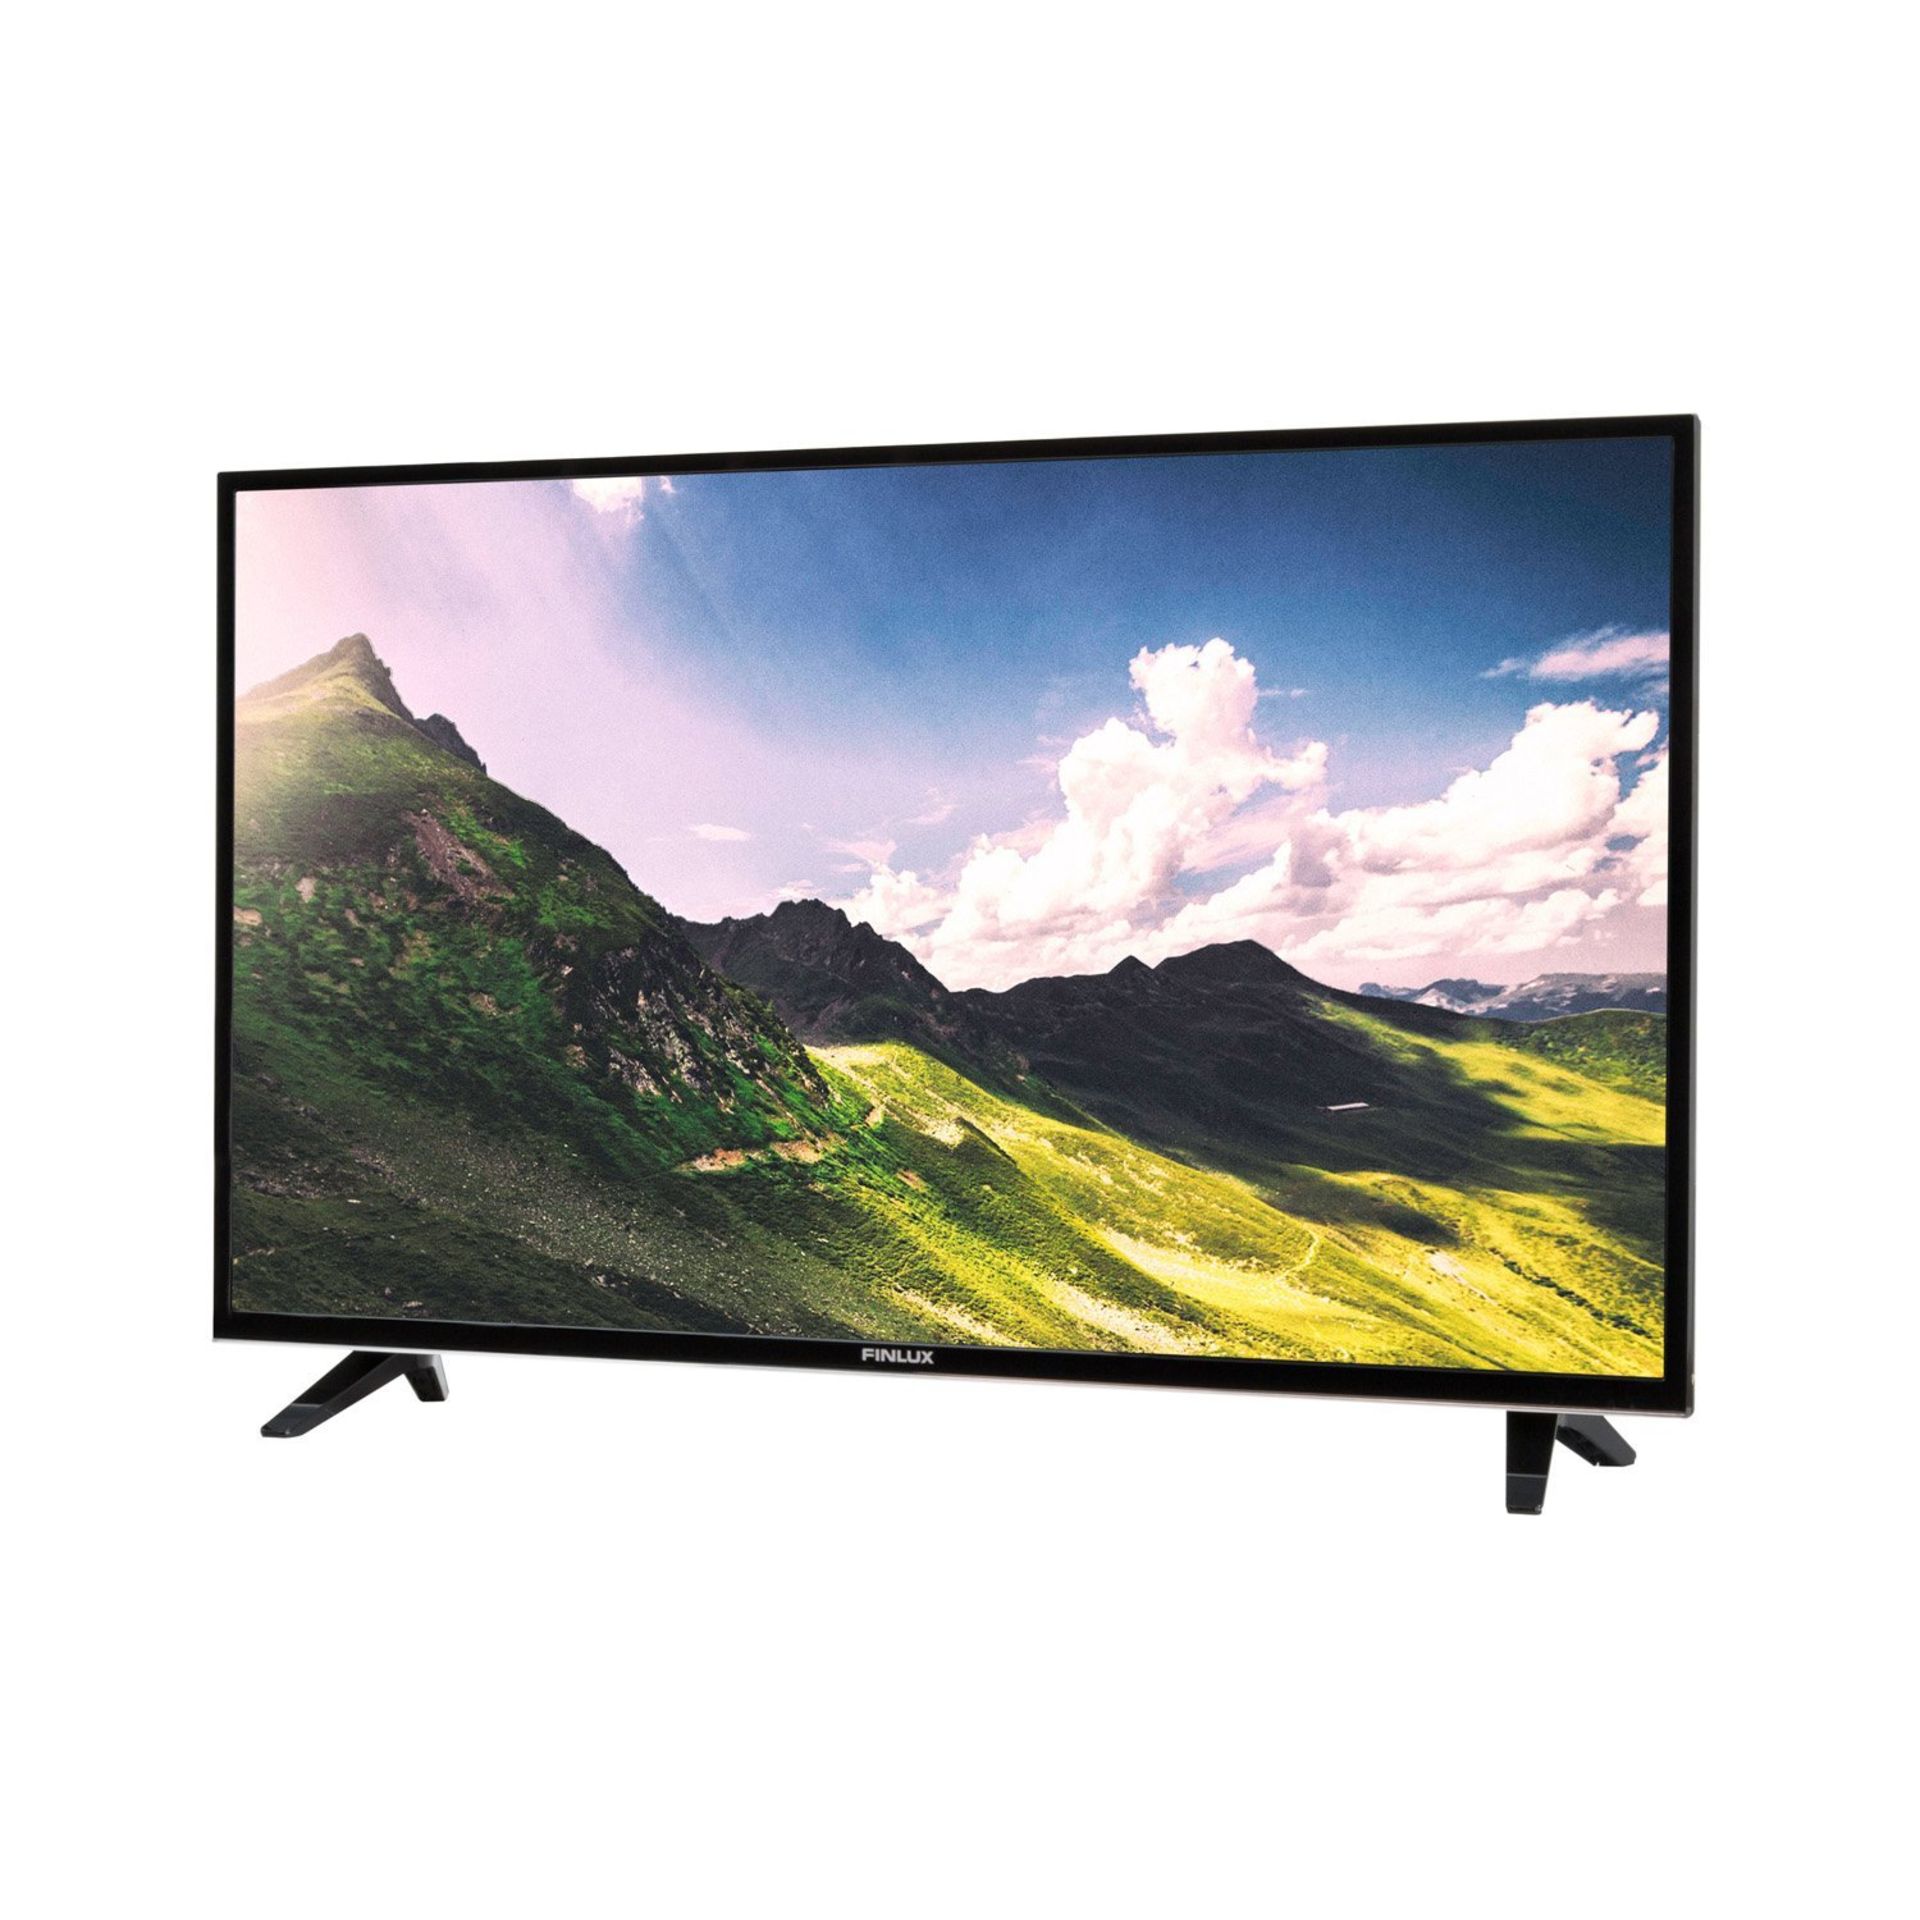 V Grade A Finlux 49" 4K Ultra HD LED Smart TV with Freeview - Built-in Wi-Fi - 2 x HDMI 2 x USB 1